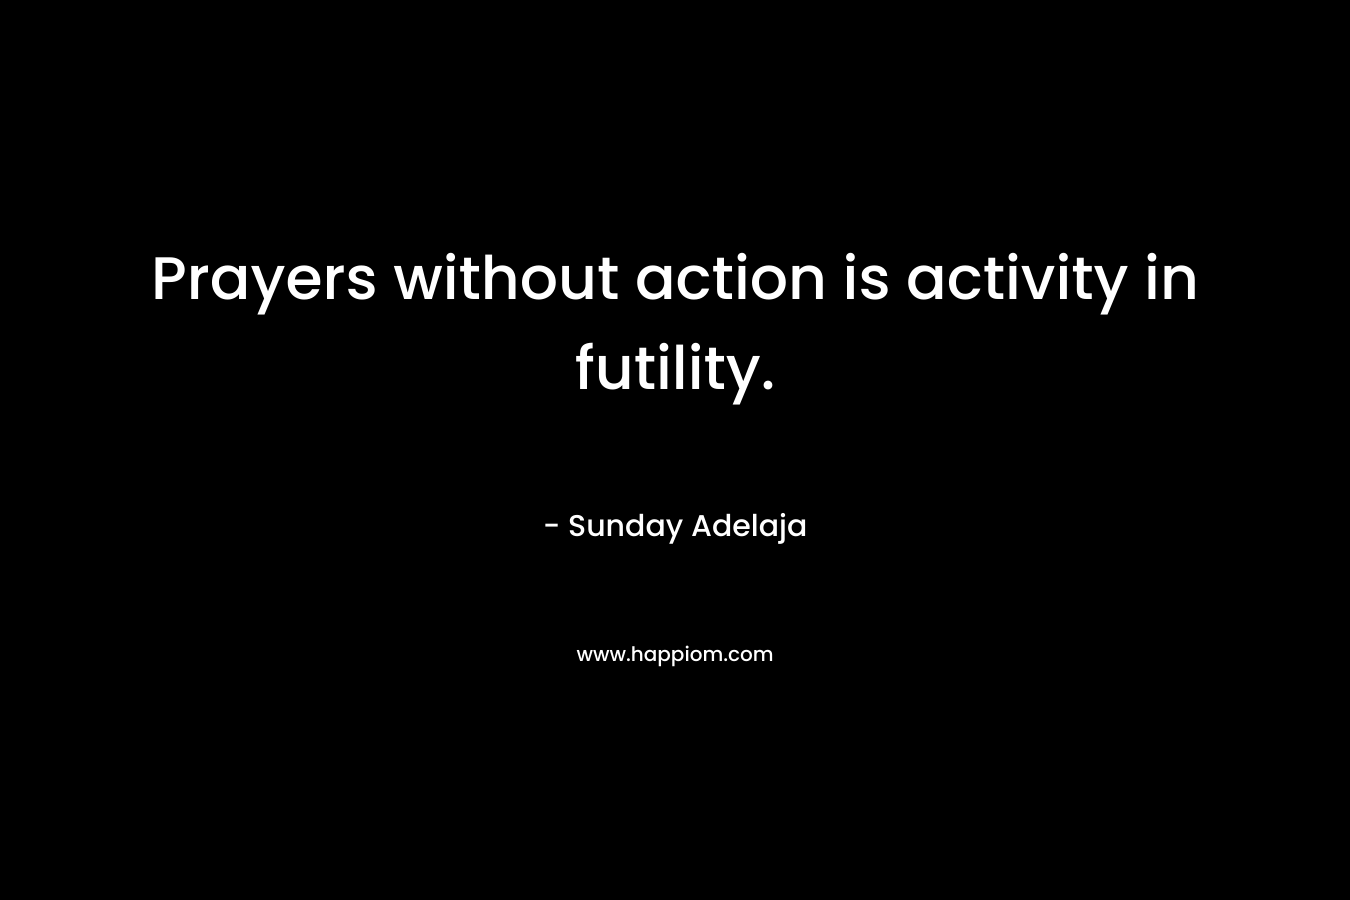 Prayers without action is activity in futility.